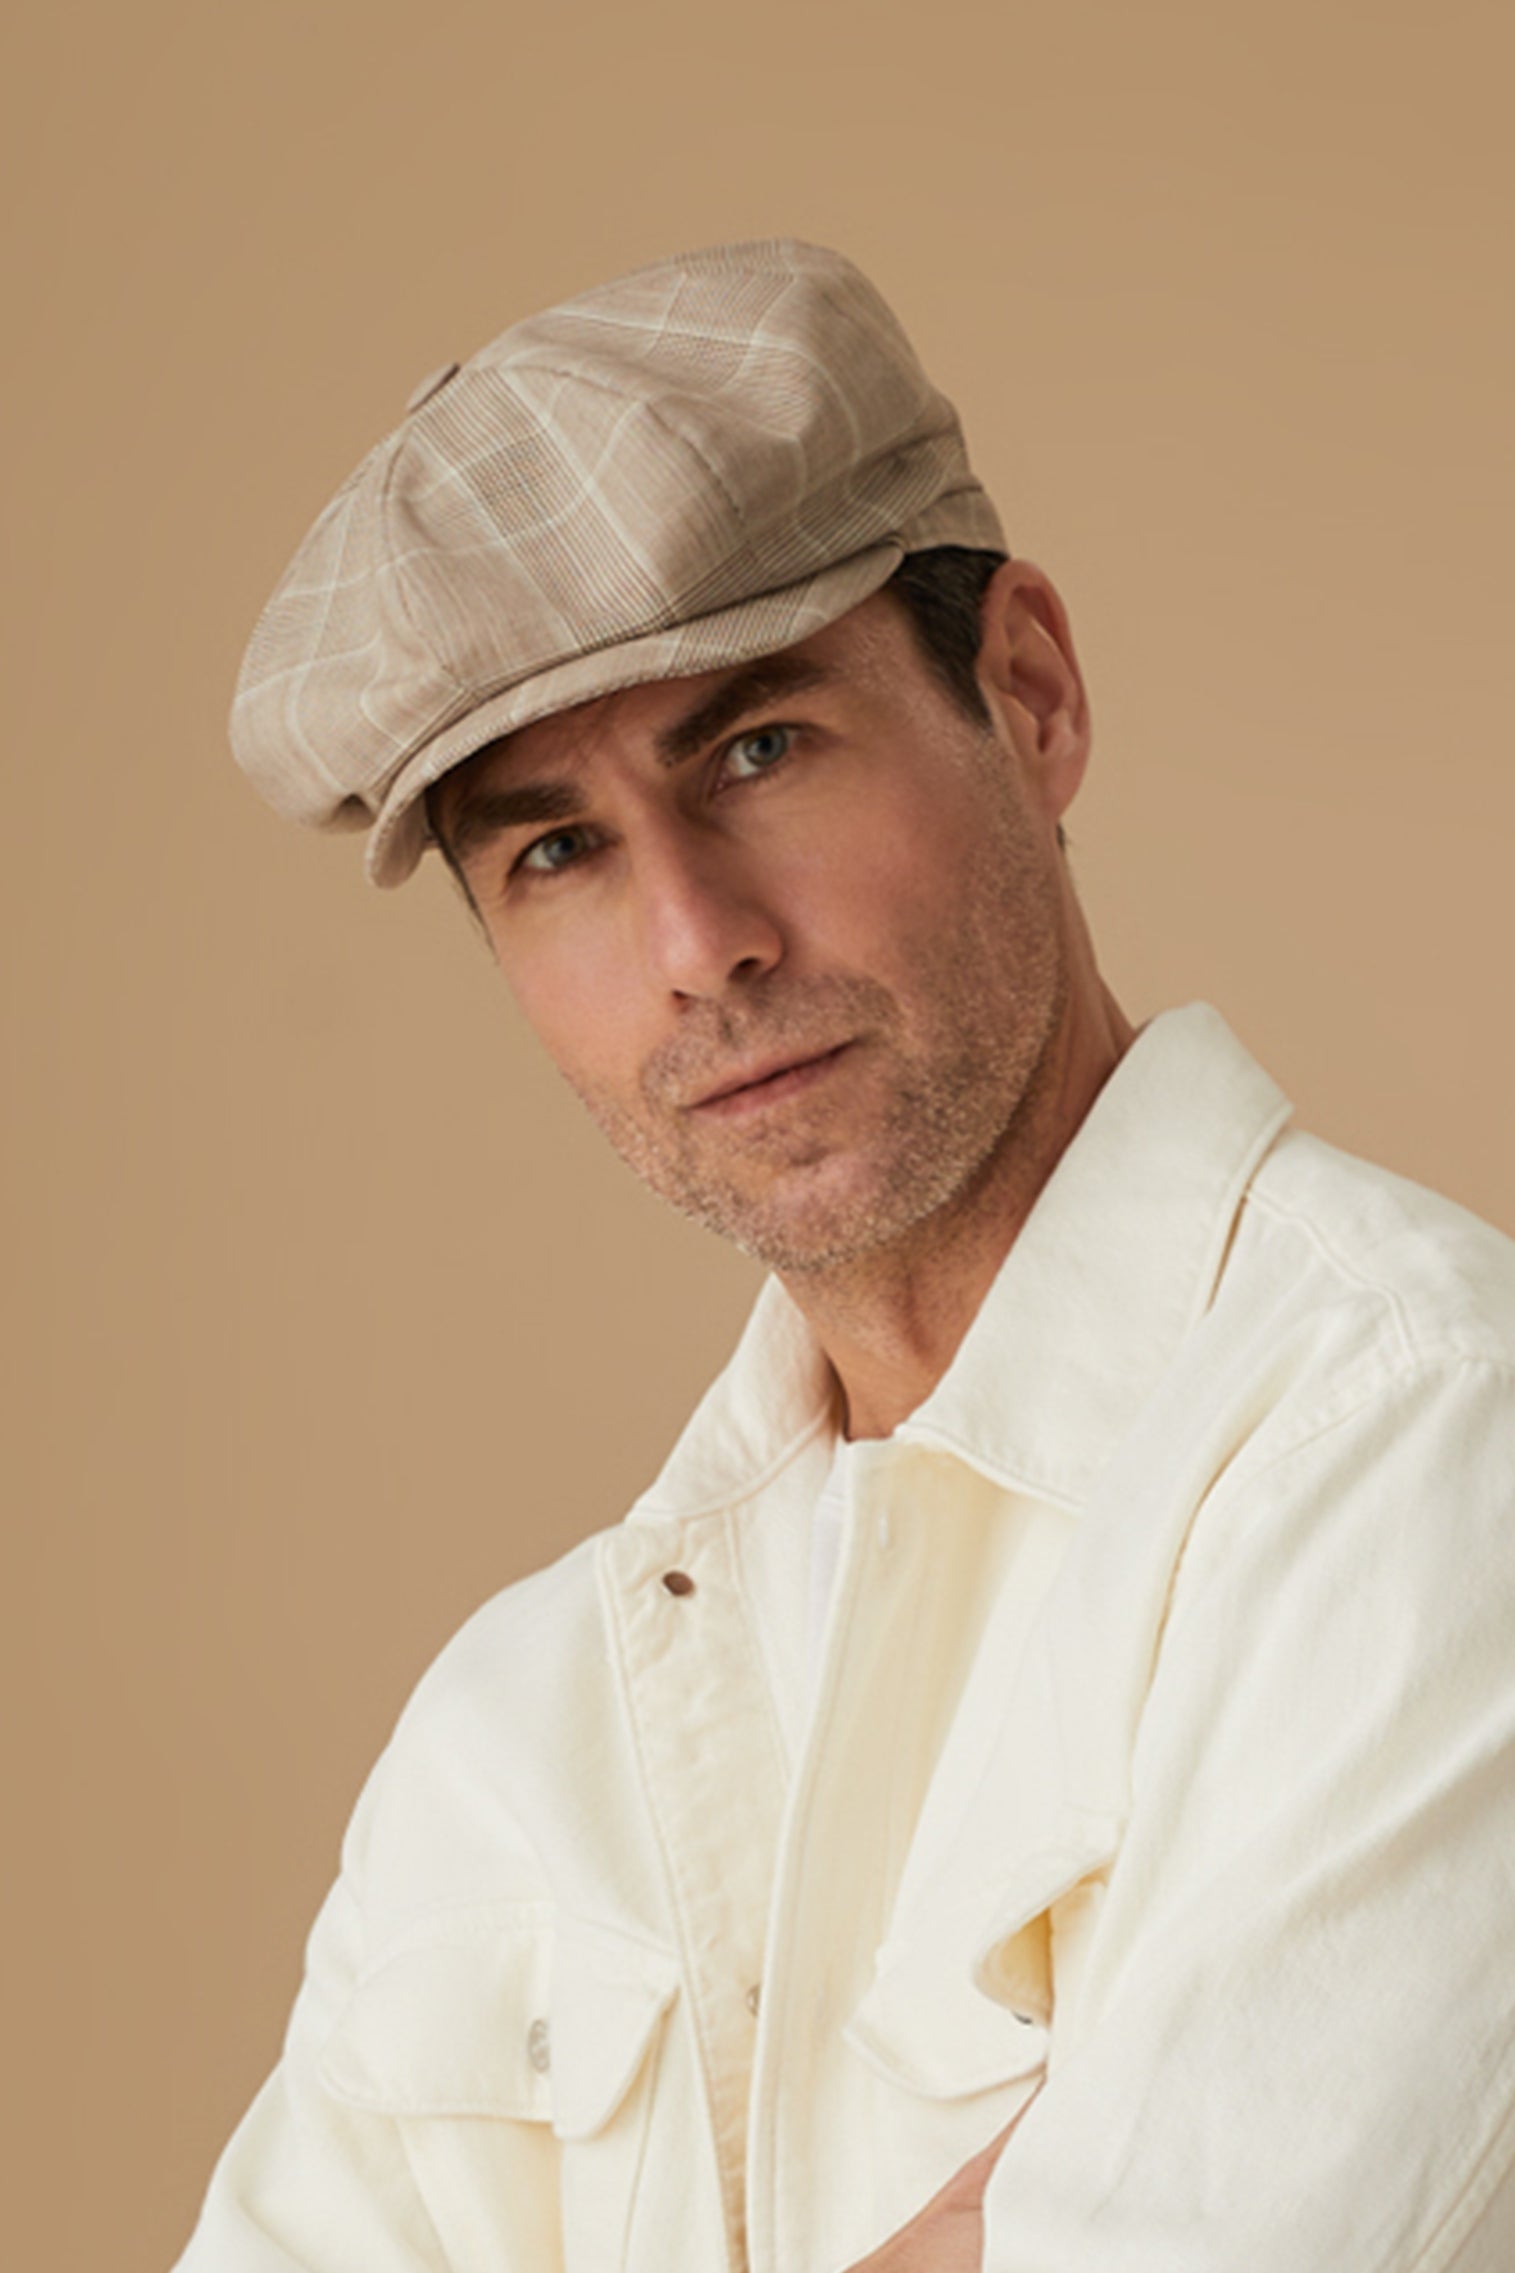 Tremelo Brown Glen-Check Bakerboy Cap - New Season Hat Collection - Lock & Co. Hatters London UK